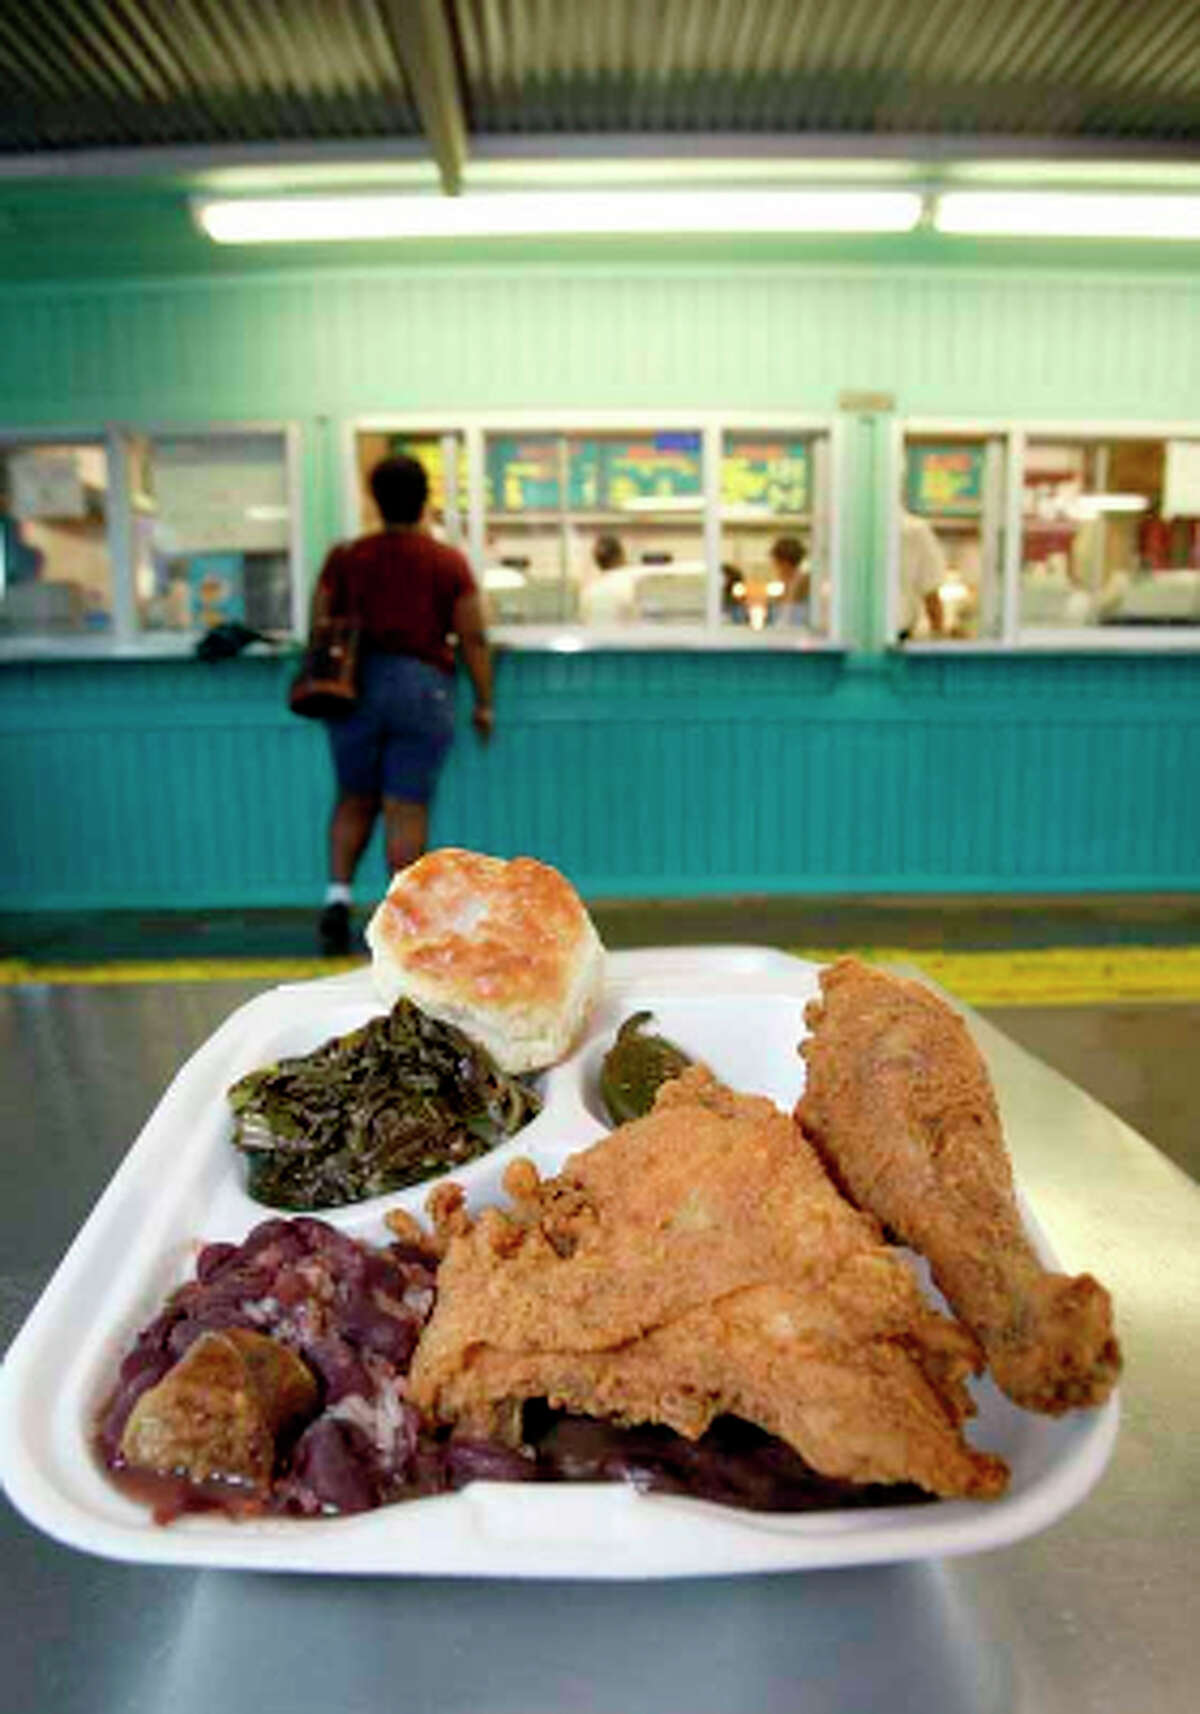 Frenchy's fried chicken to go.